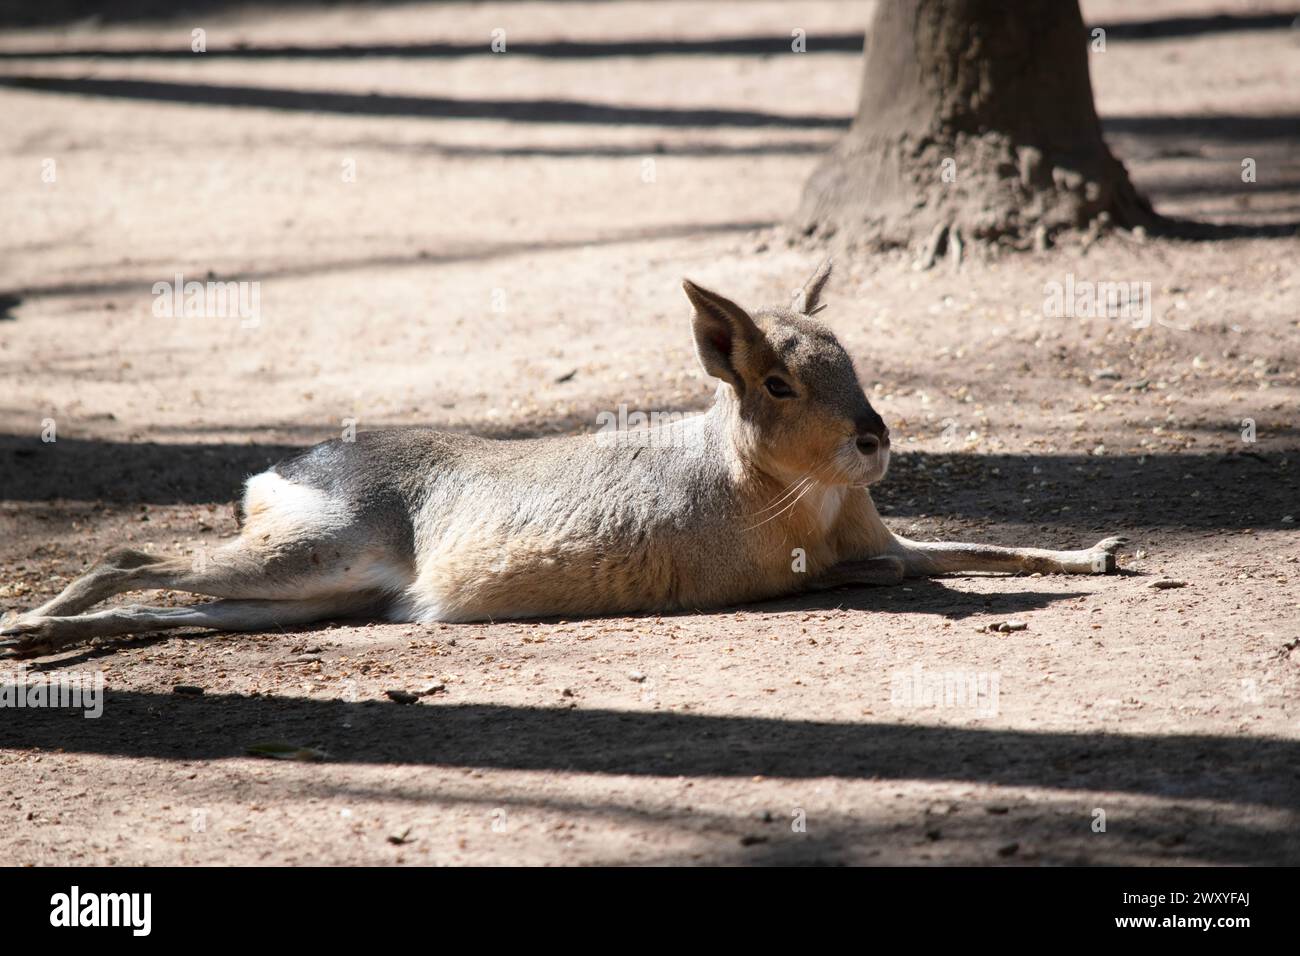 Patagonian hare, is a large rodent species that can be found in central and southern Argentina. The Patagonian cavy has long legs that allow it to rea Stock Photo